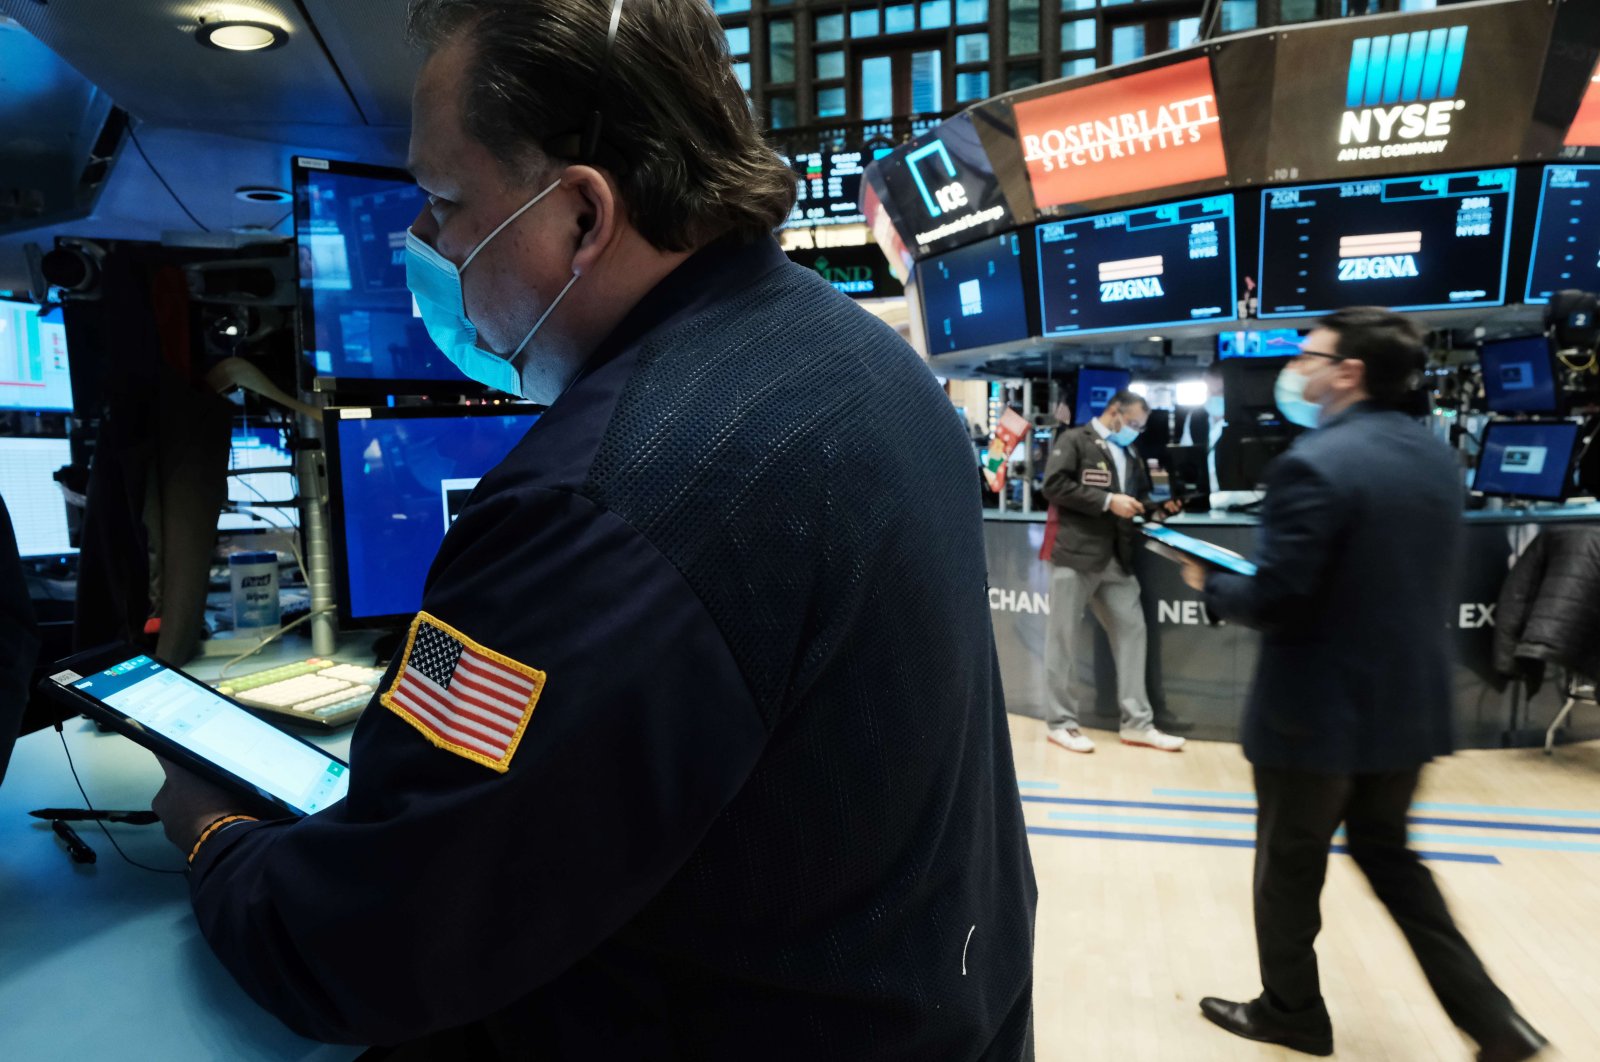 A trader works on the floor of the New York Stock Exchange (NYSE), New York, U.S., Dec. 20, 2021. (AFP Photo)